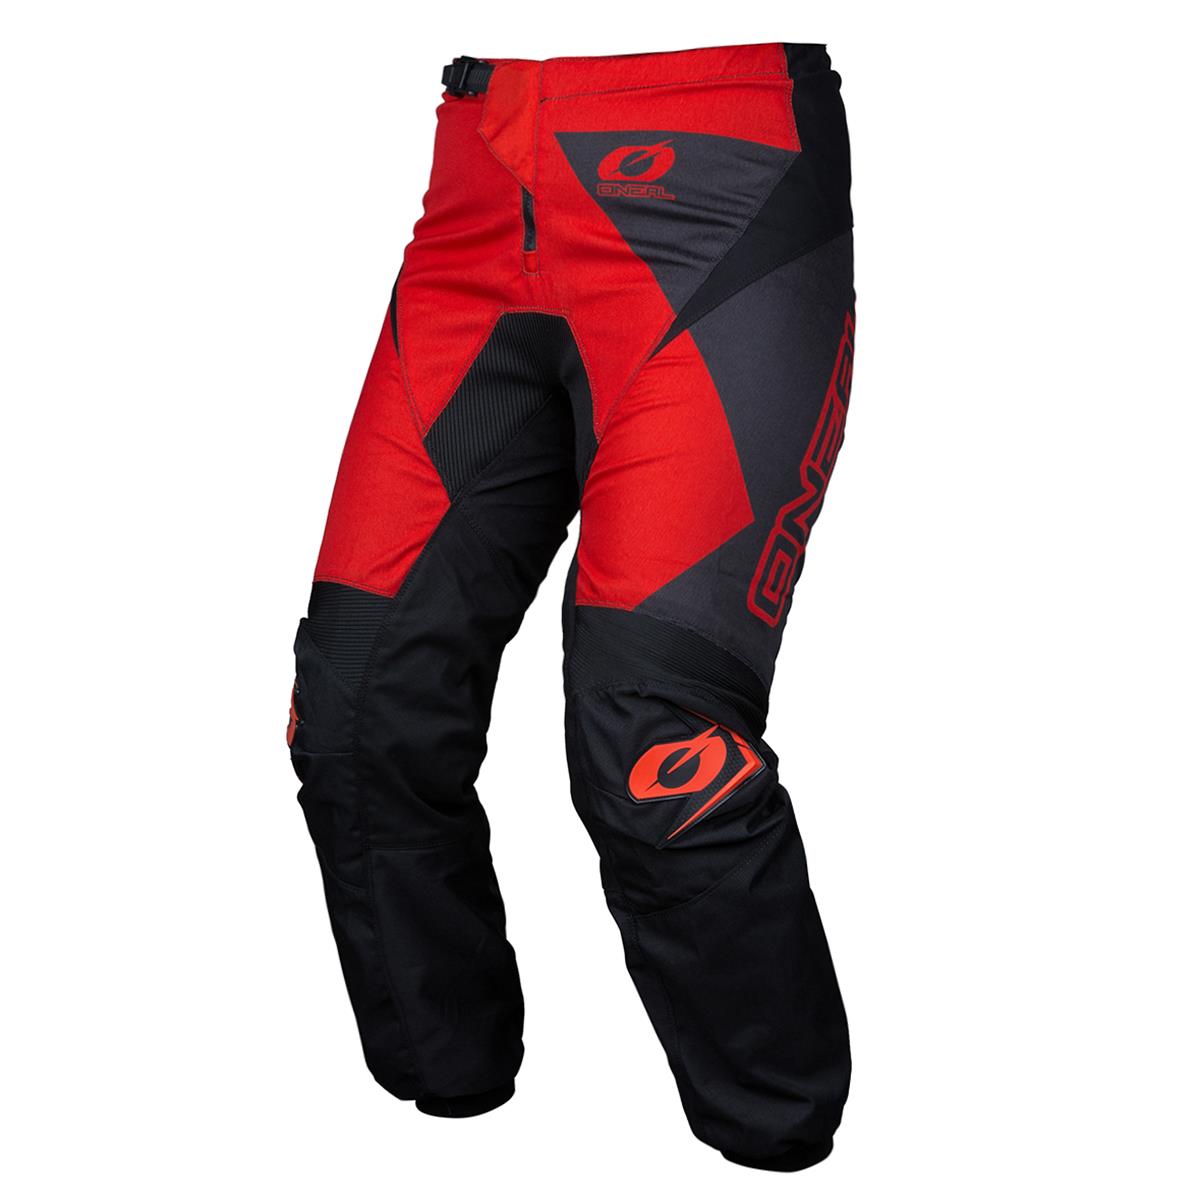 Black/White/Red, 50 ONeal Mens MX Pants 